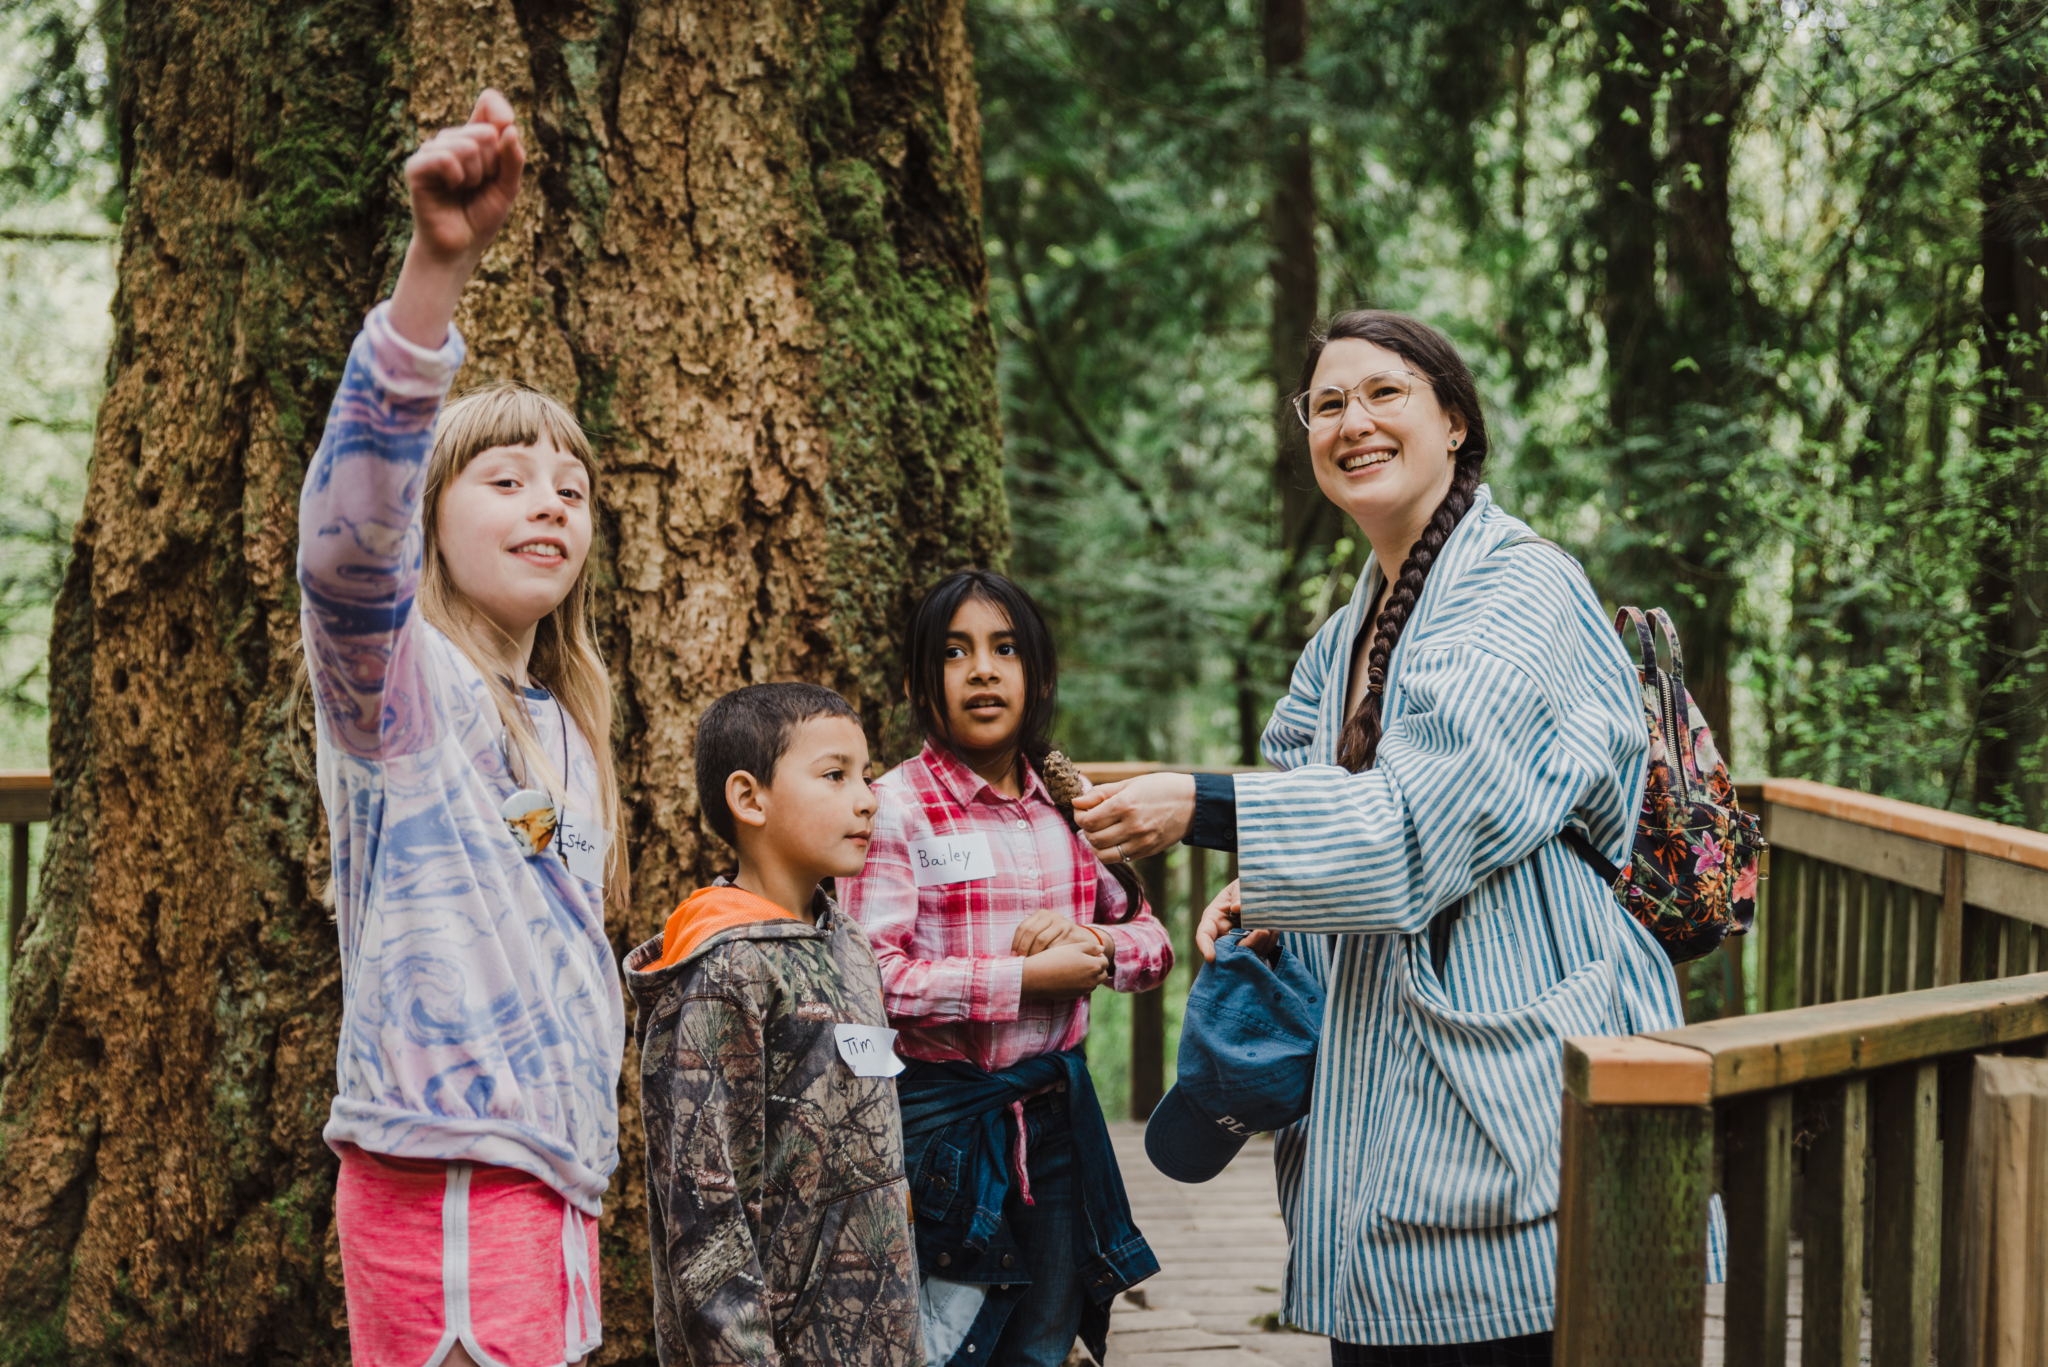 A smiling adult leads a group of kids on a forest adventure.